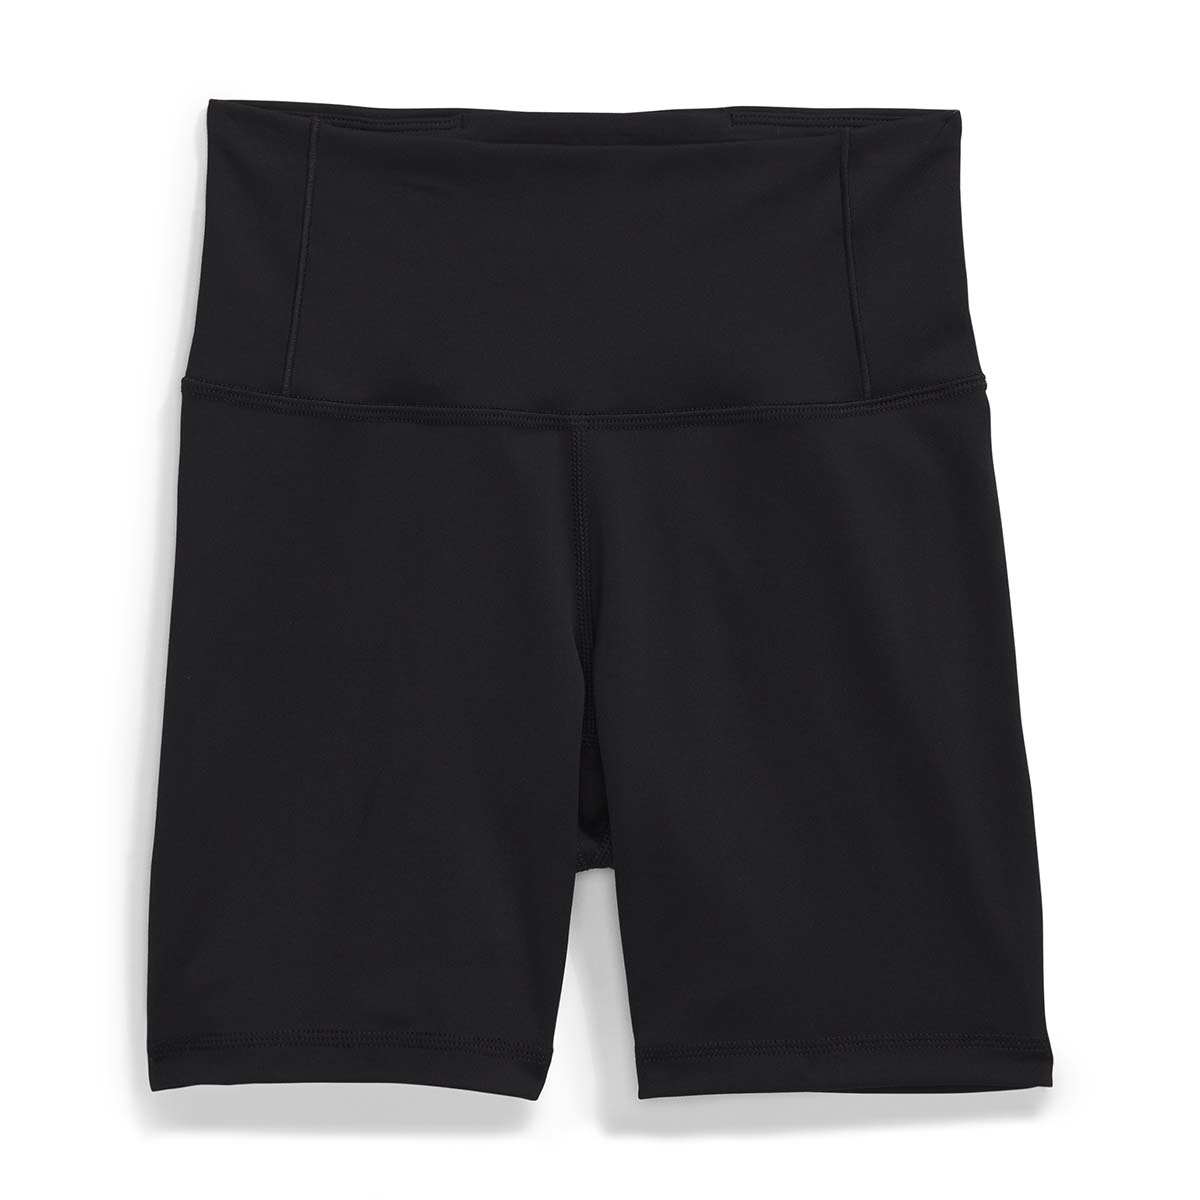 The North Face Women's Dune Sky Tights Shorts